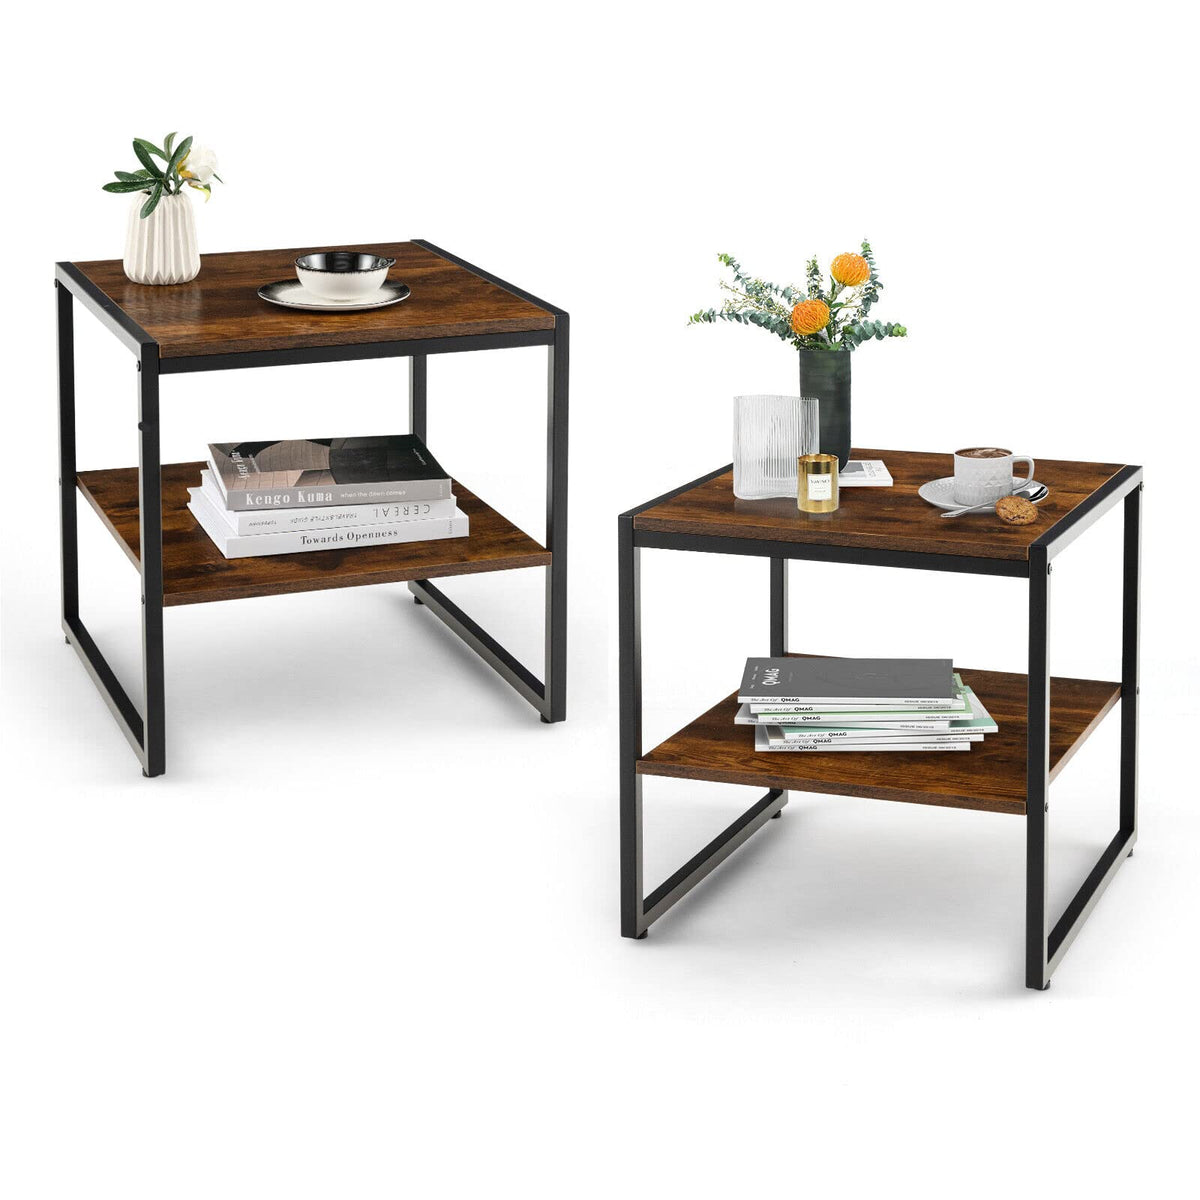 Giantex End Table Set of 2, Industrial 2-Tier Coffee Tables with Open Storage Shelf, Rustic Brown